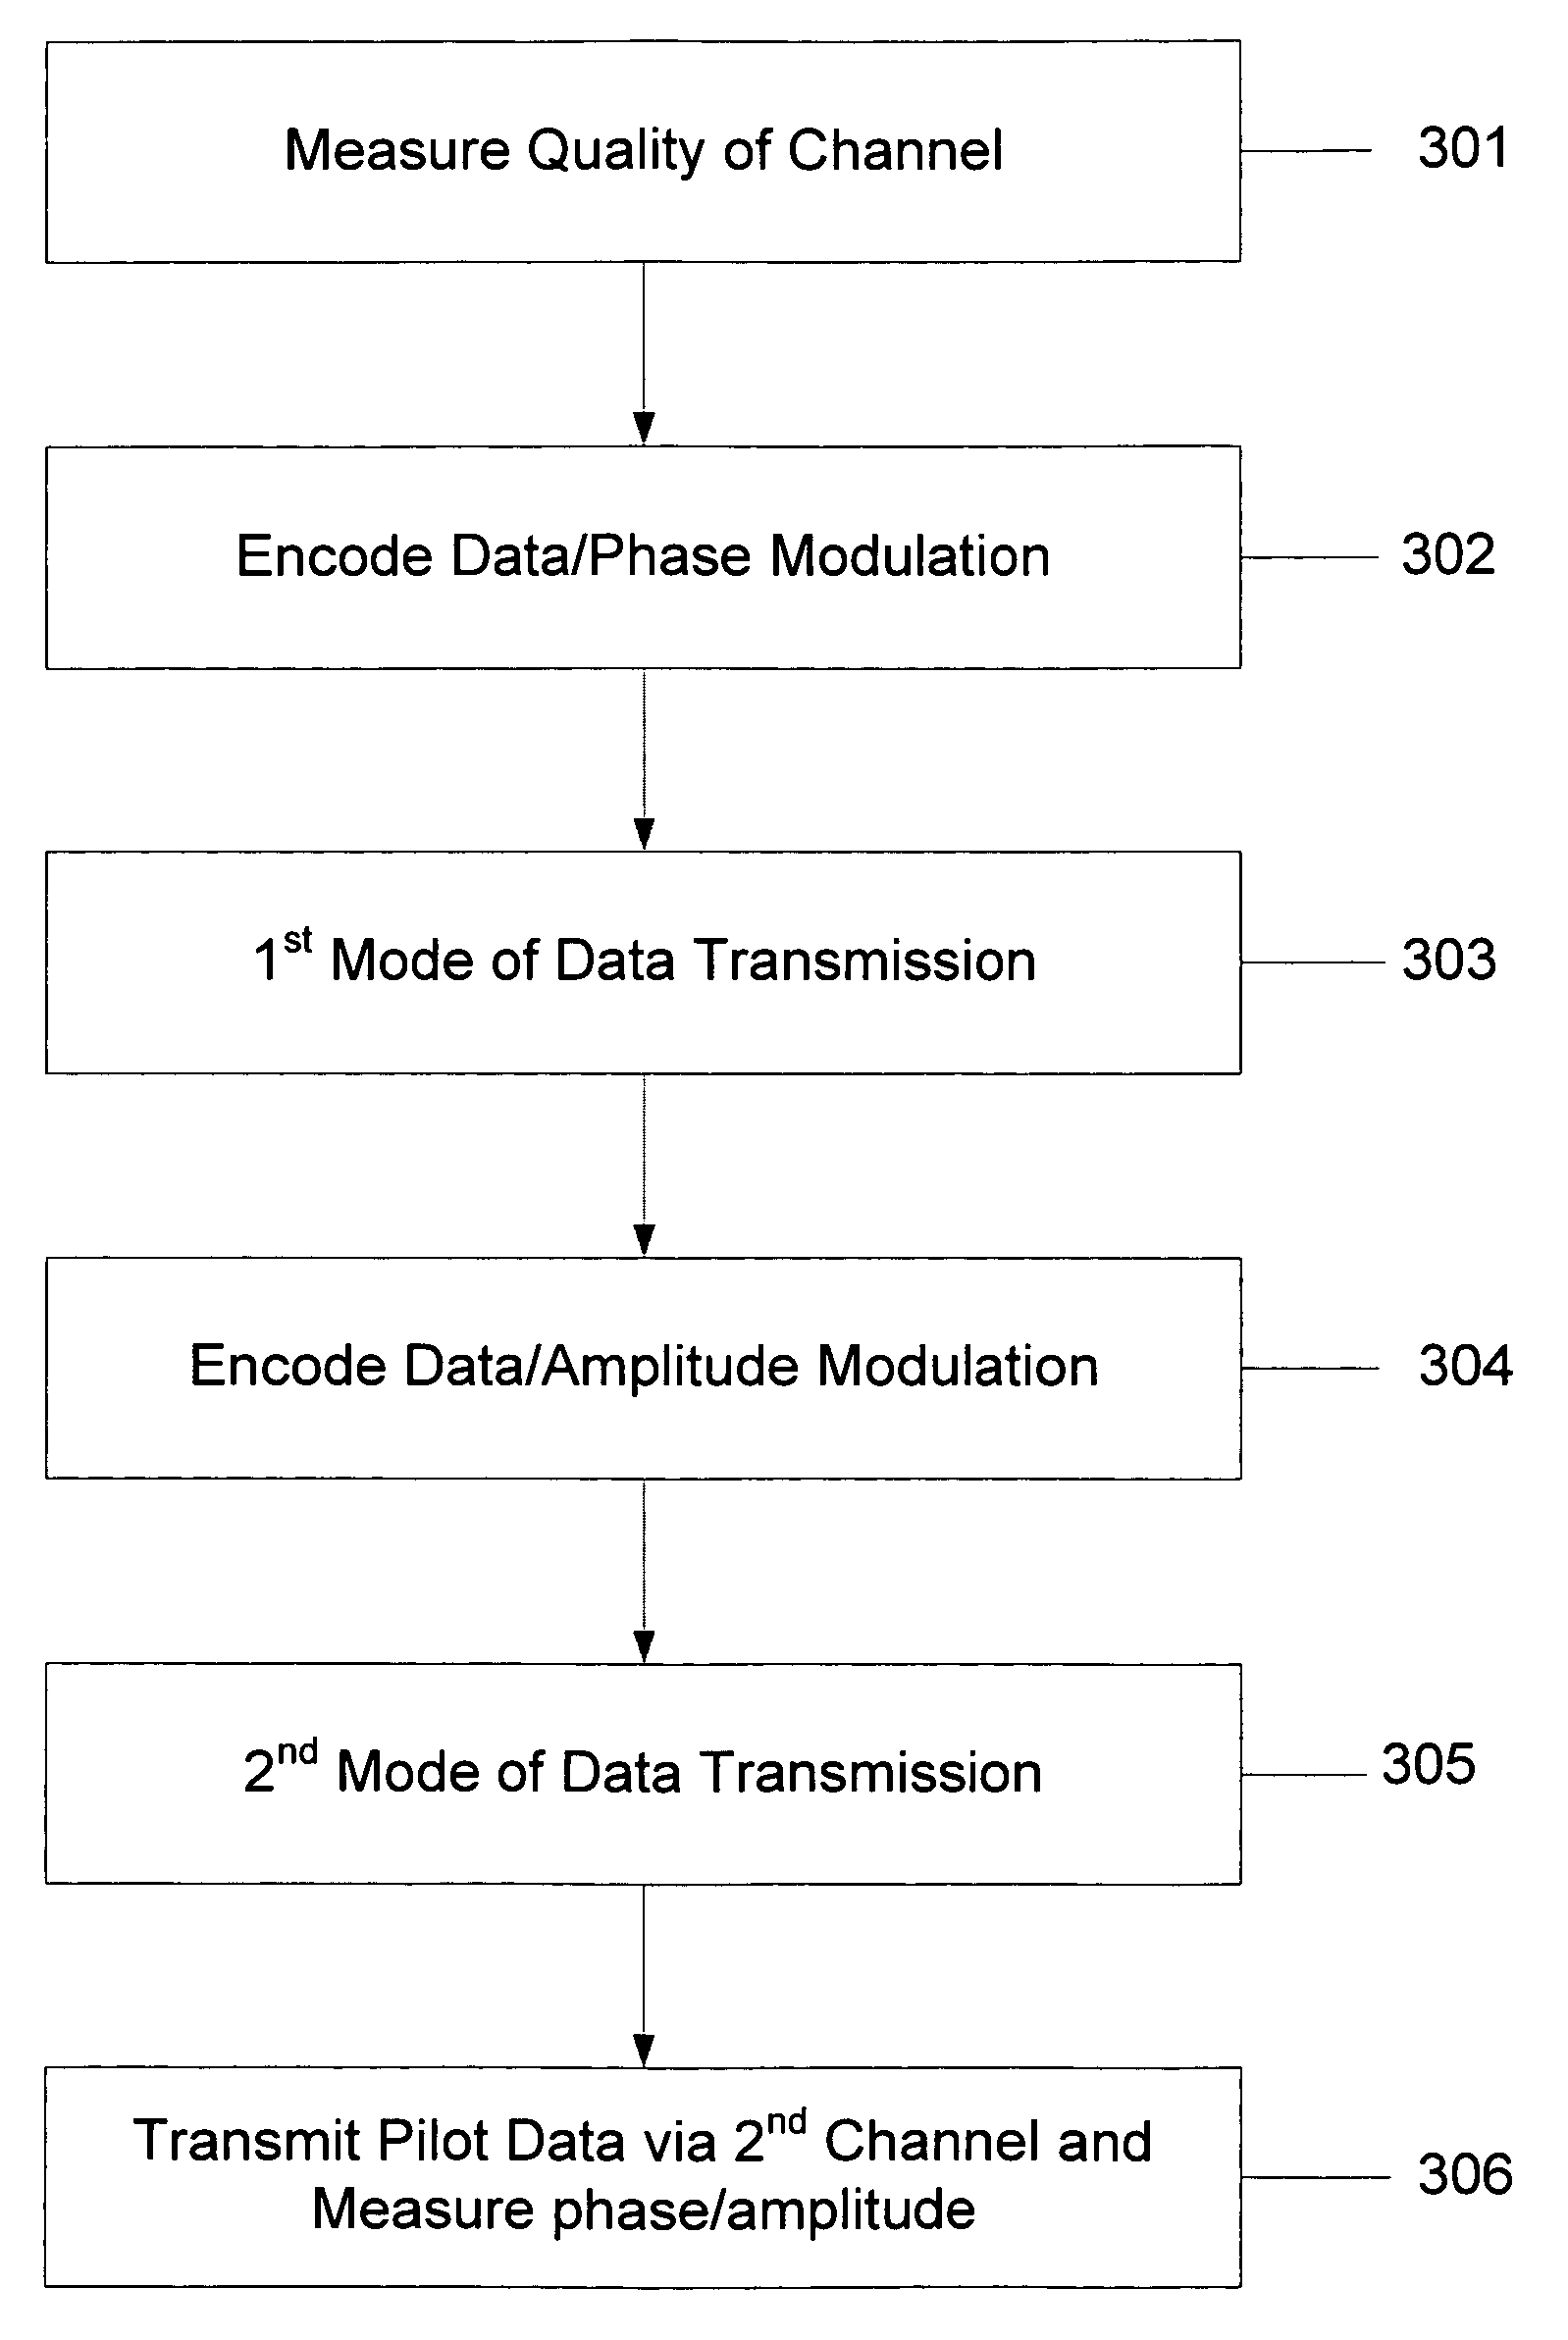 Method of transmitting data where in a first mode, the power level is not indicated in a message and an NPSK modulation scheme is used, and in a second mode, the power level is indicated in a message in an NQAM modulation scheme is used